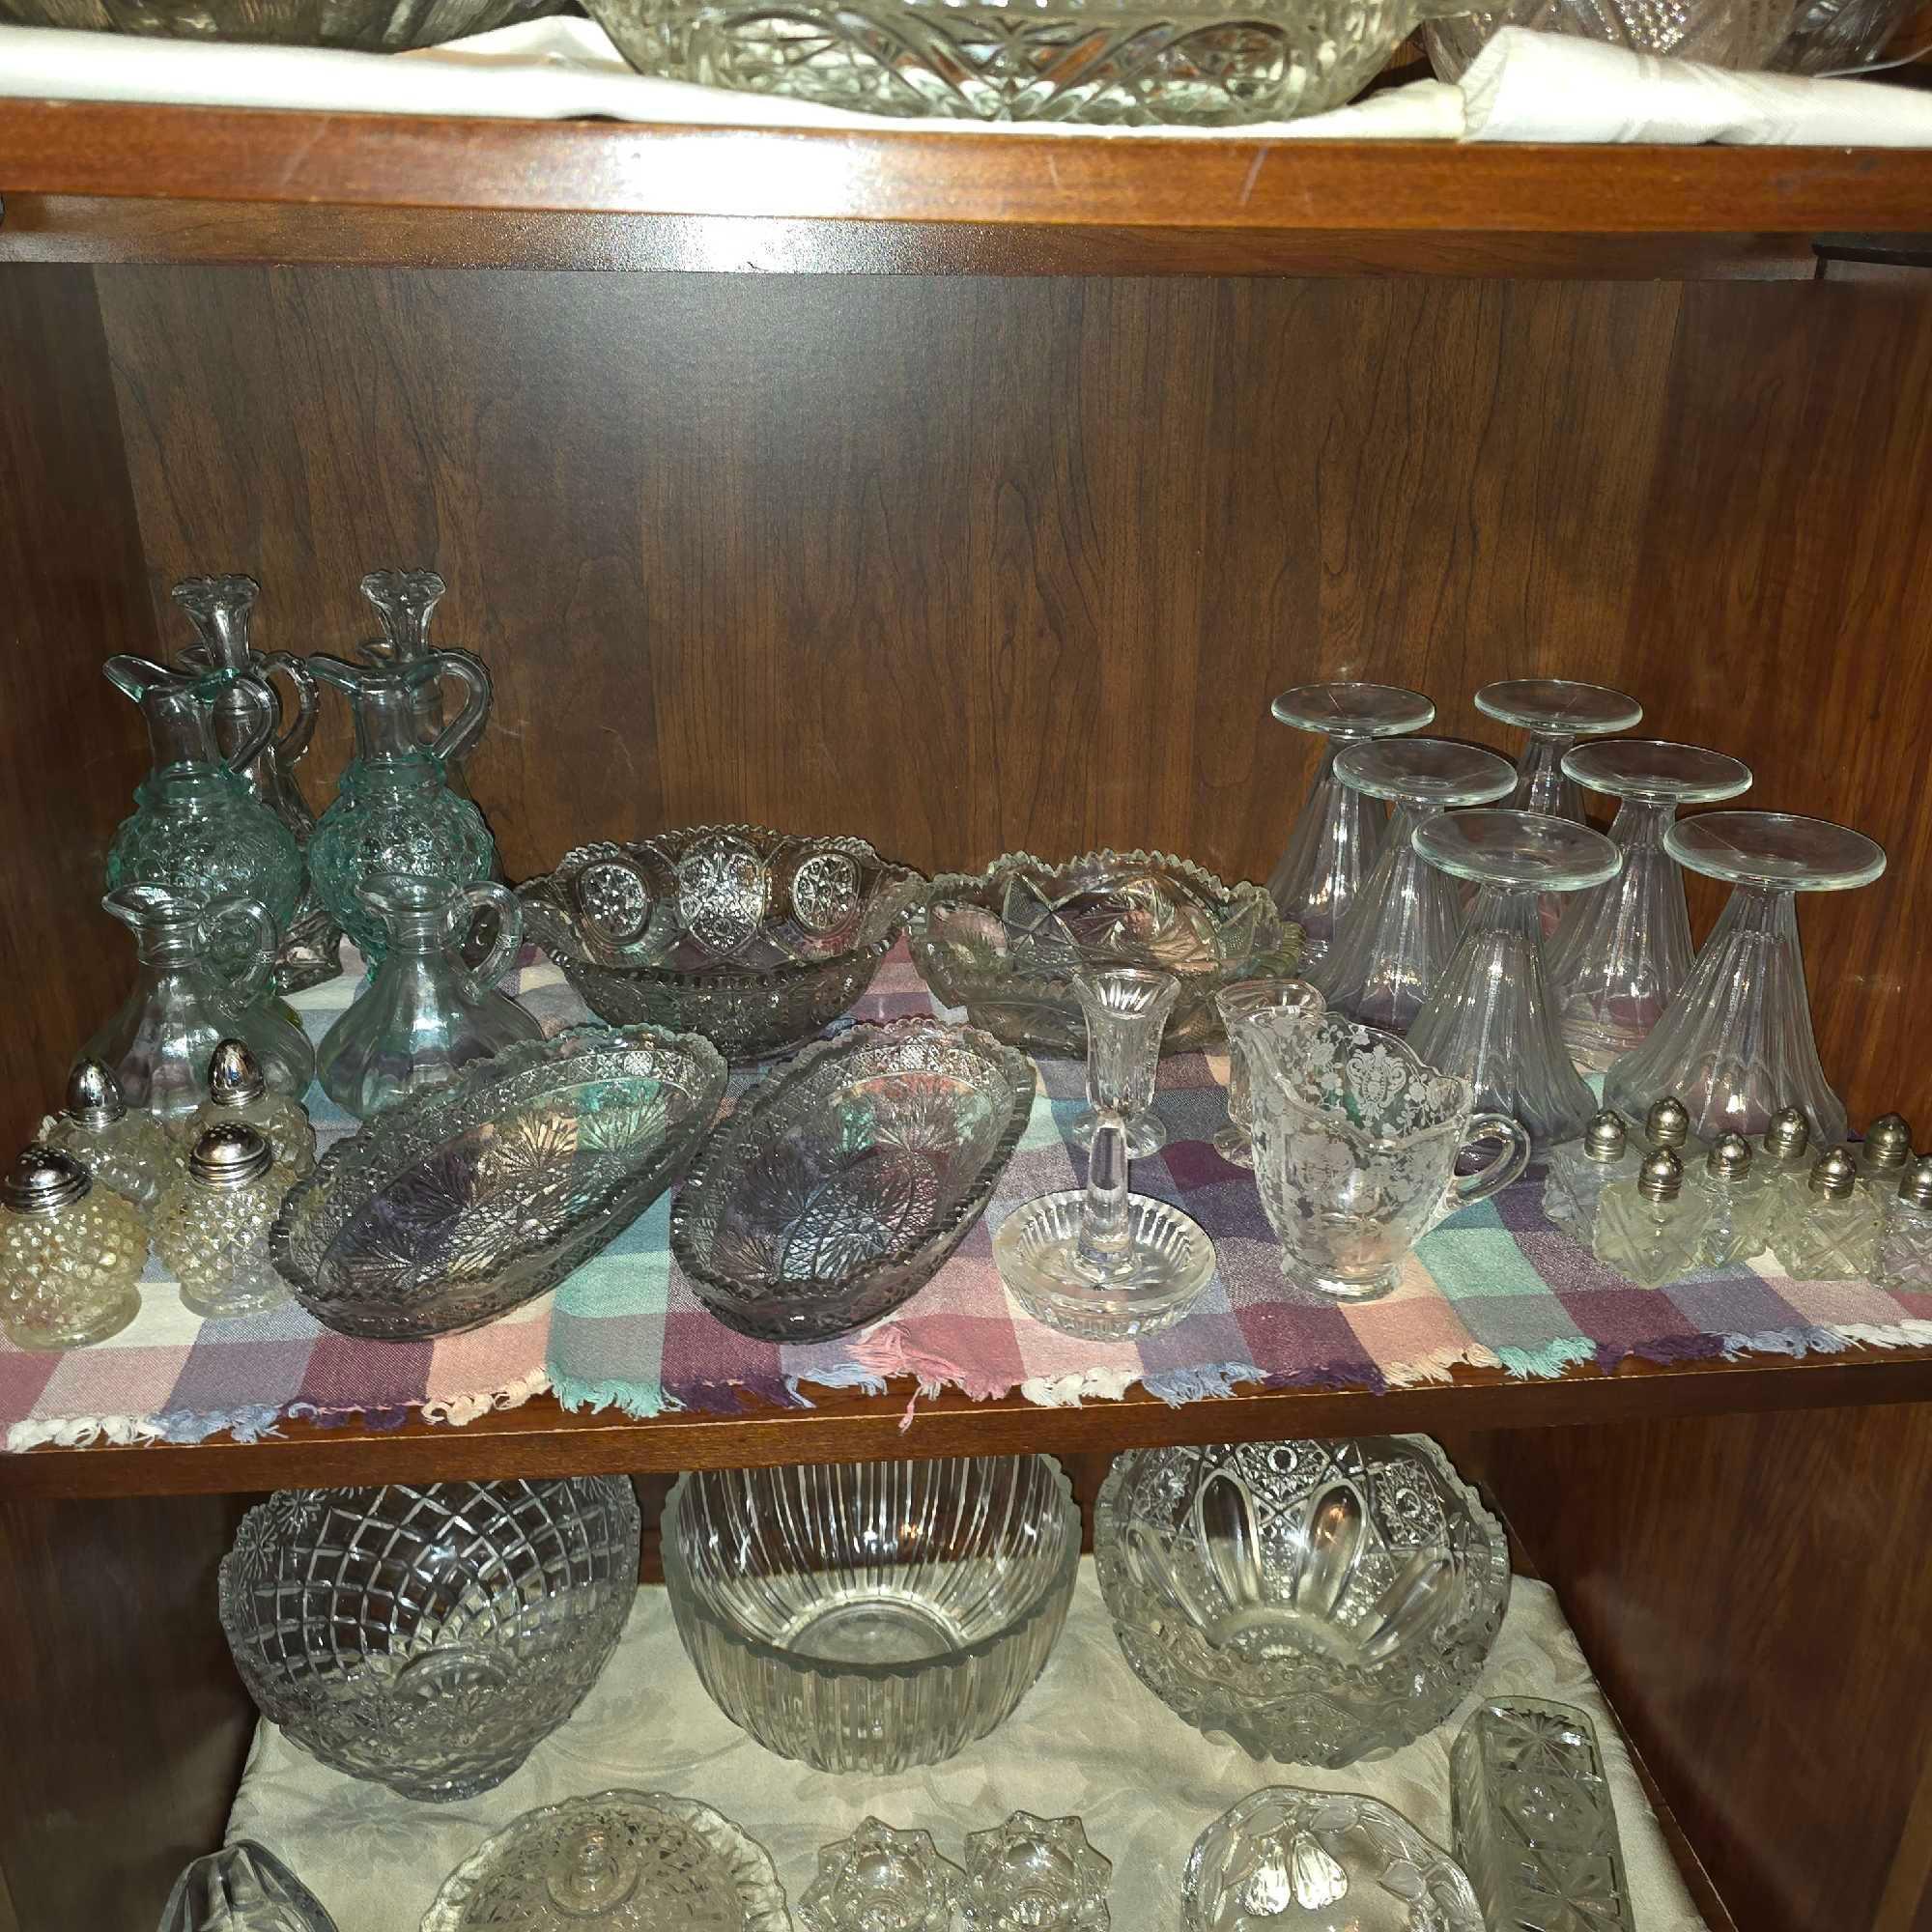 Contents of Cabinet - Patternware, Shakers, & Assorted Glassware